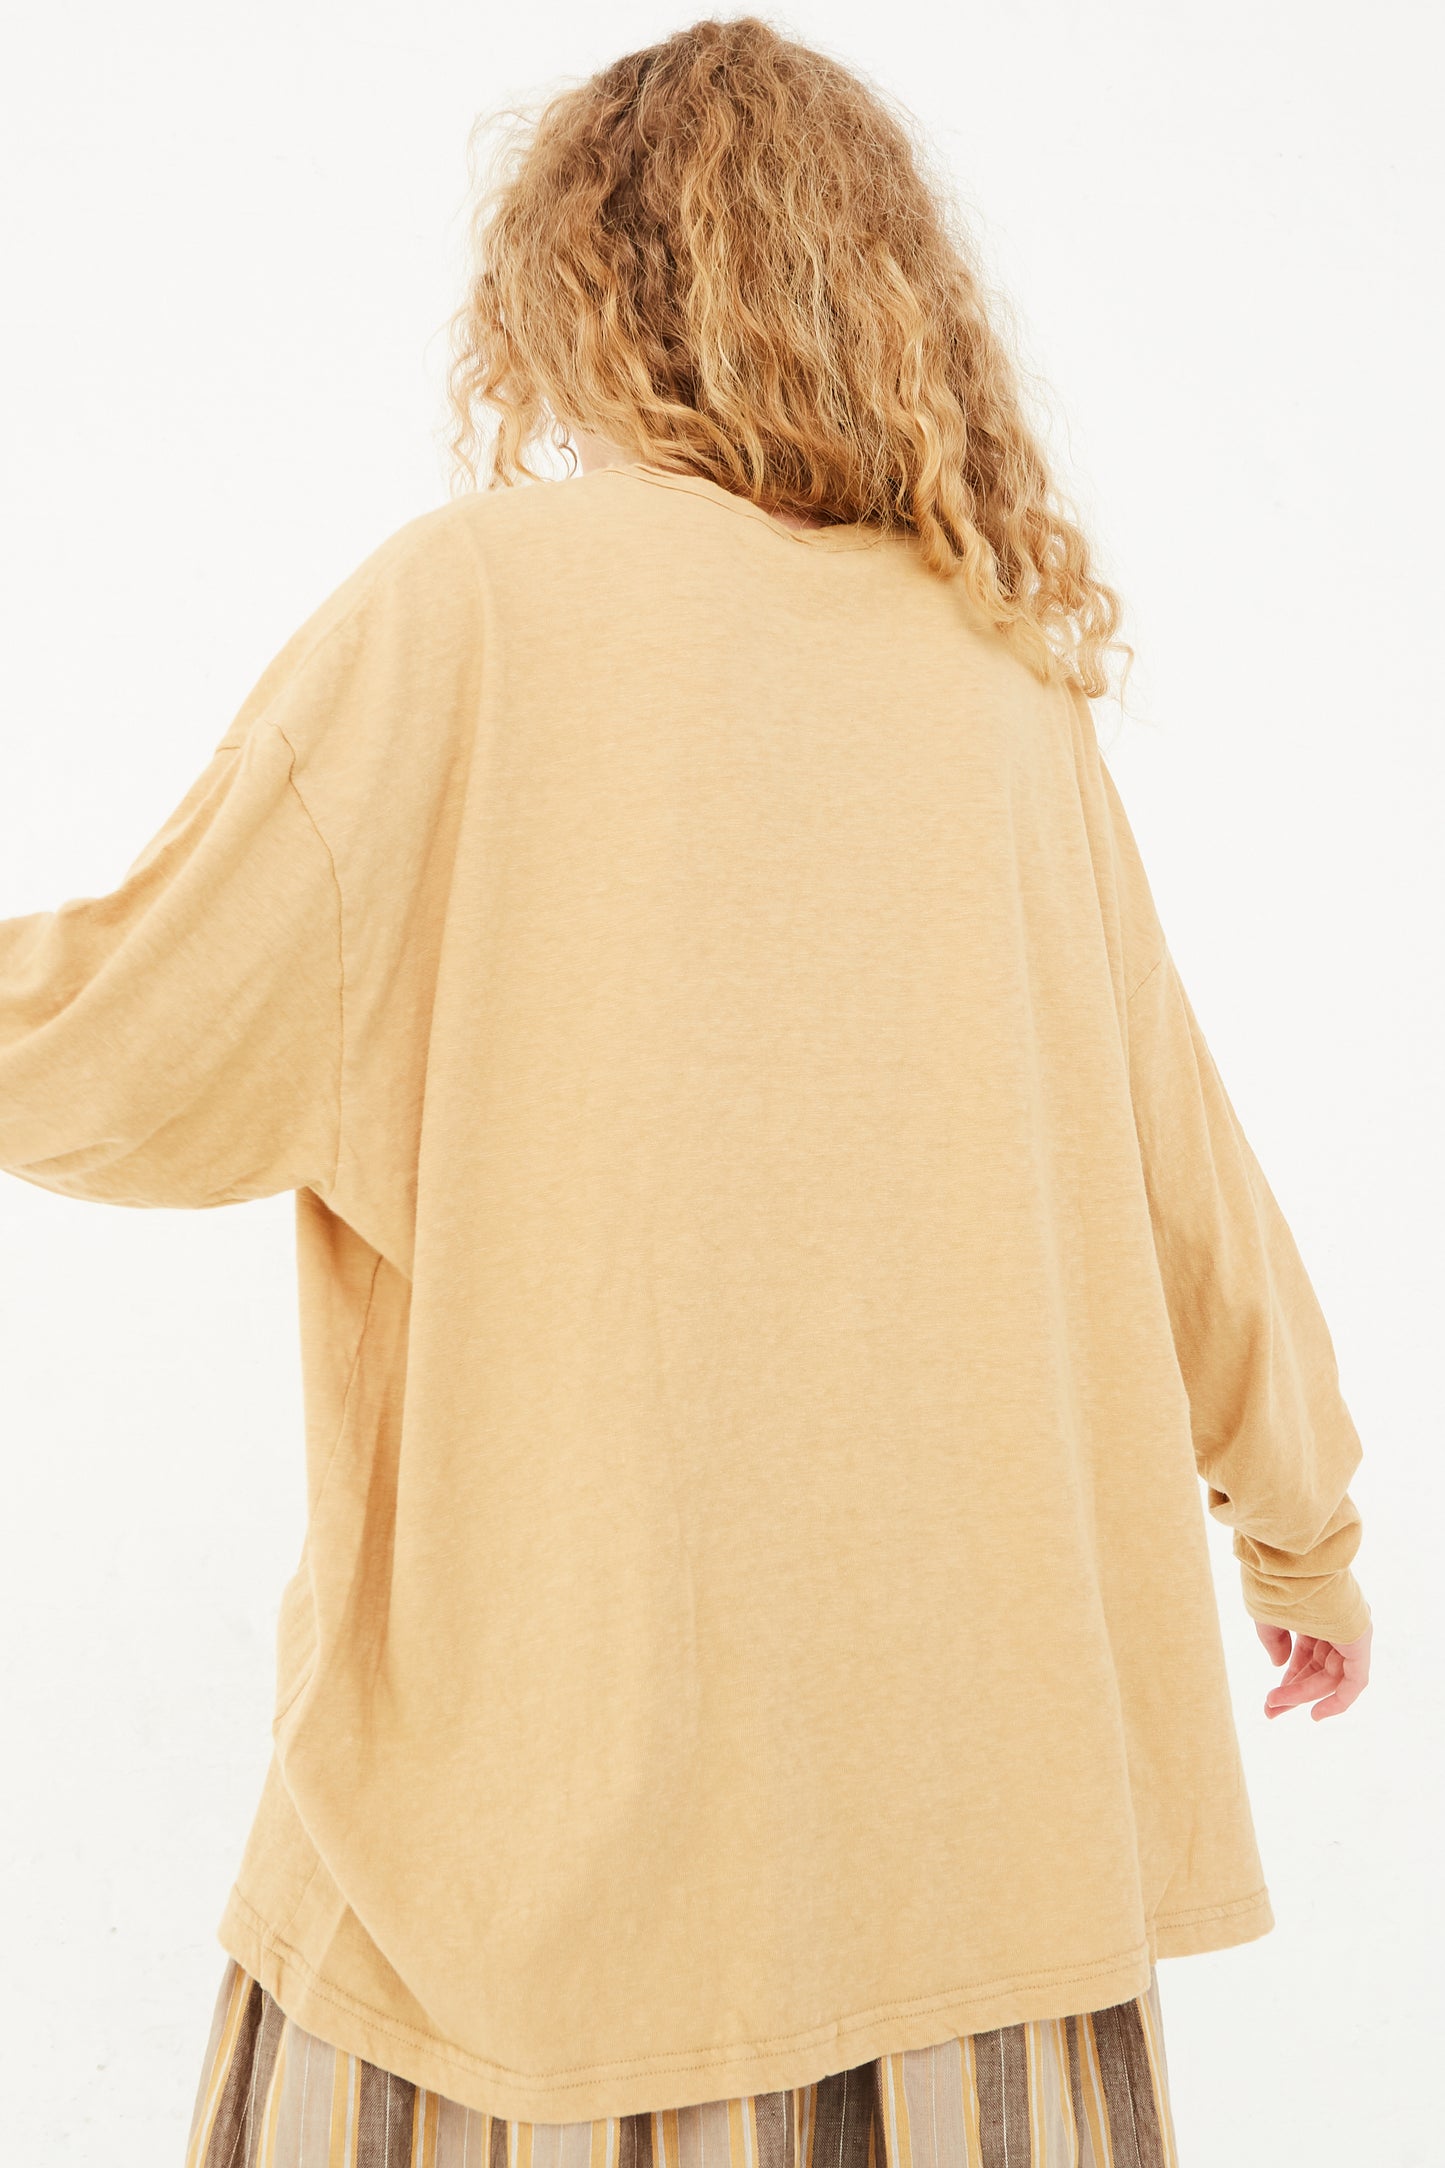 The back of a model wearing a Ichi Antiquités Cotton Loose Pullover in Camel, available at Oroboro store in NYC.